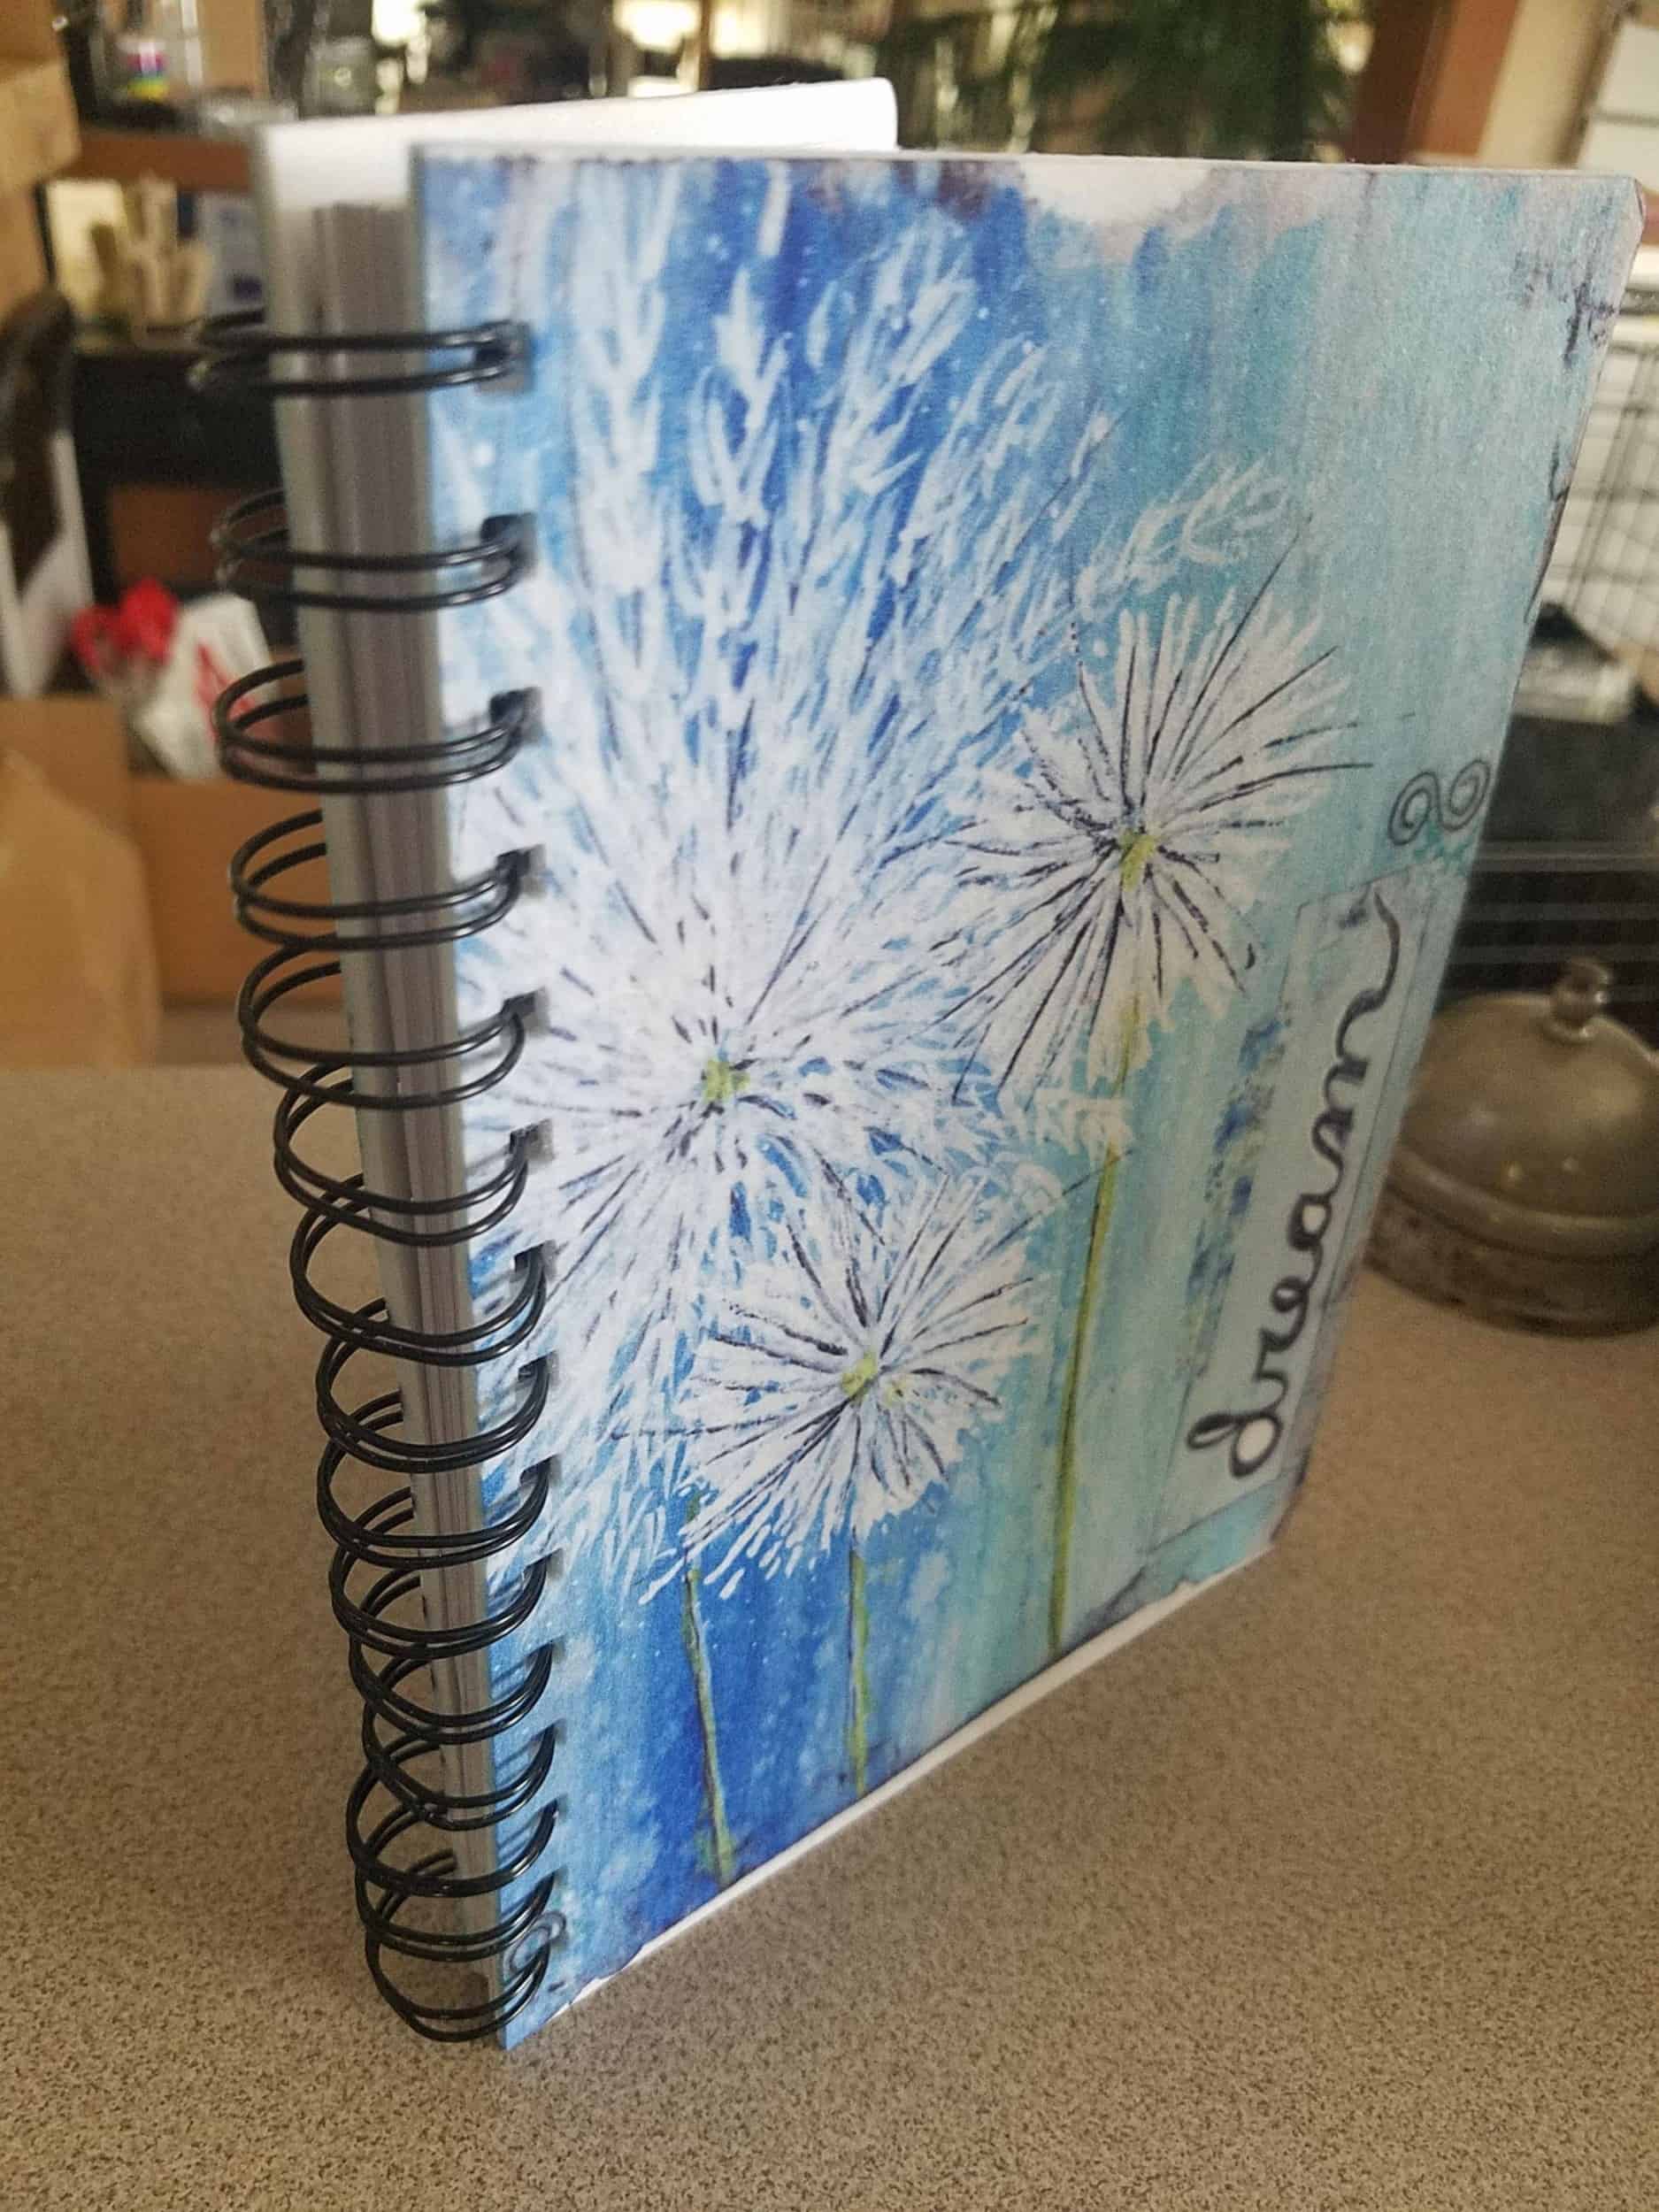 This Dream -  Spiral Bound journal is made with love by Studio Patty D! Shop more unique gift ideas today with Spots Initiatives, the best way to support creators.